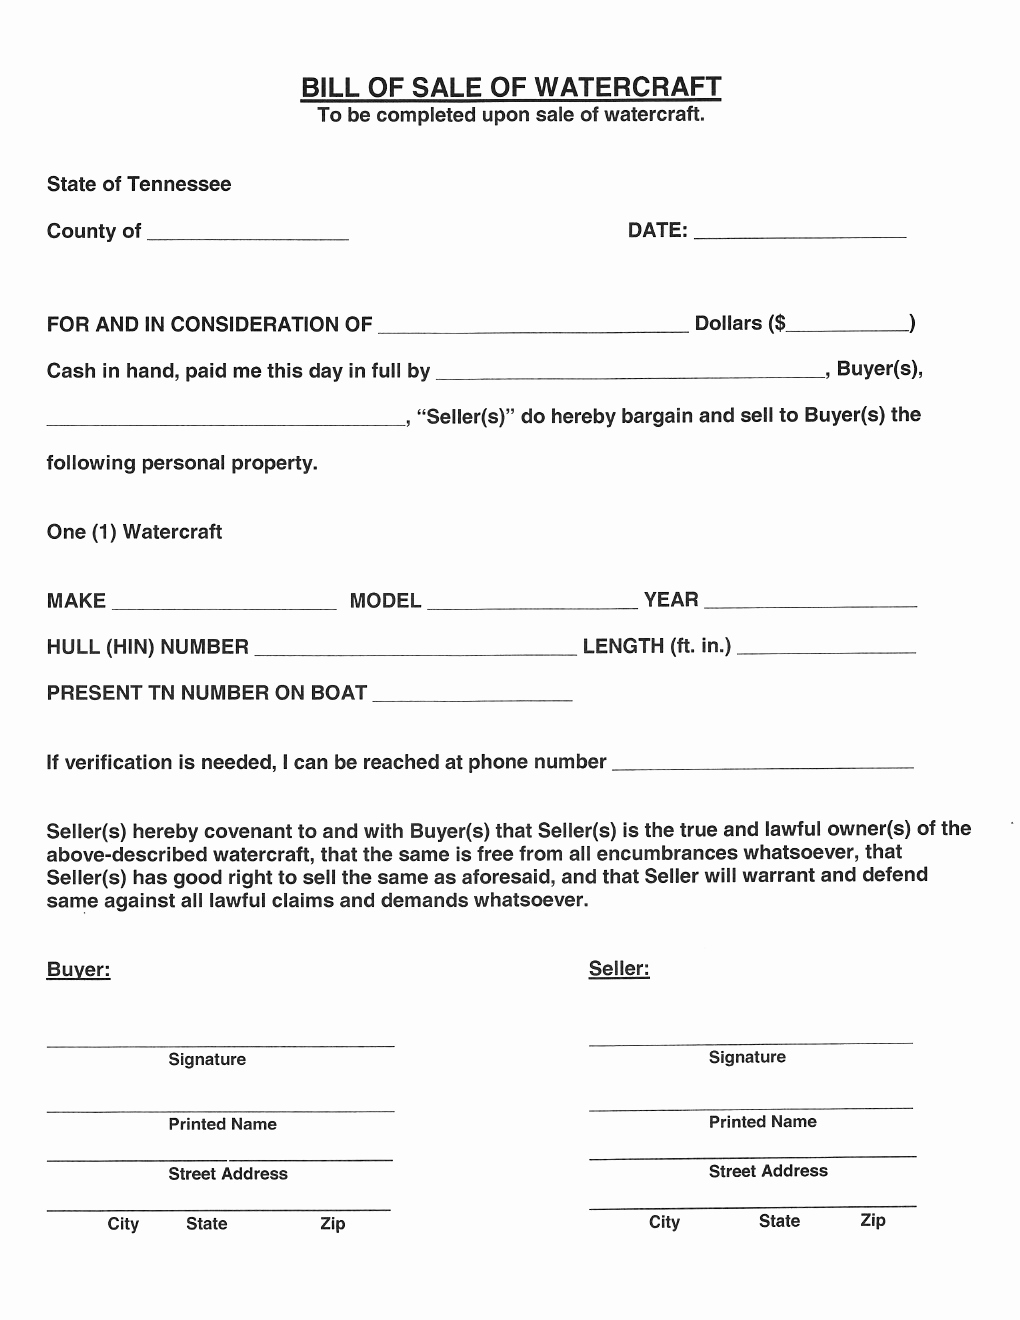 Boat Trailer Bill Of Sale Inspirational Free Tennessee Watercraft Bill Of Sale form Download Pdf